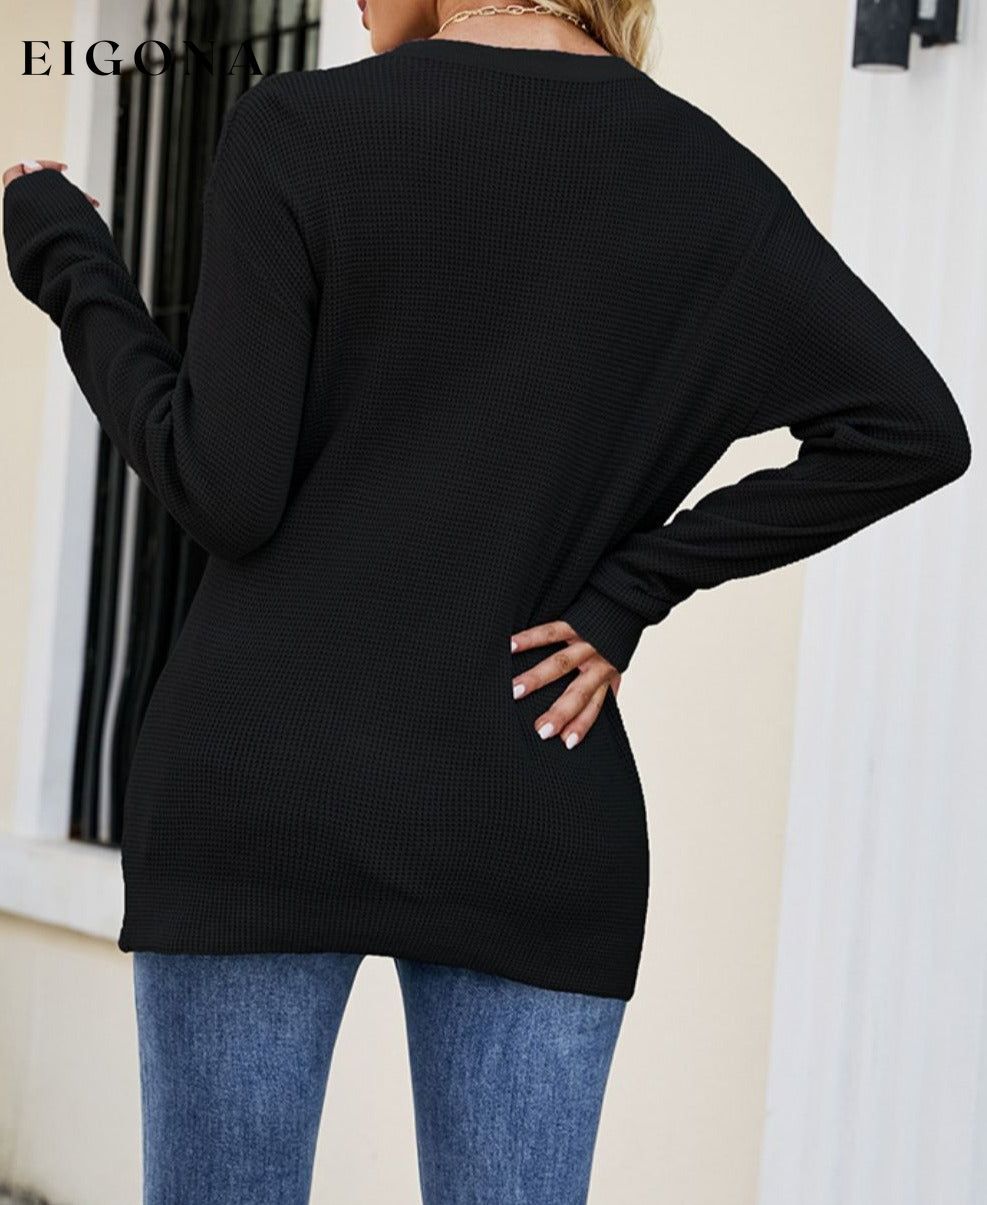 Twisted Round Neck Sweater clothes Drizzle long sleeve Ship From Overseas sweaters Sweatshirt